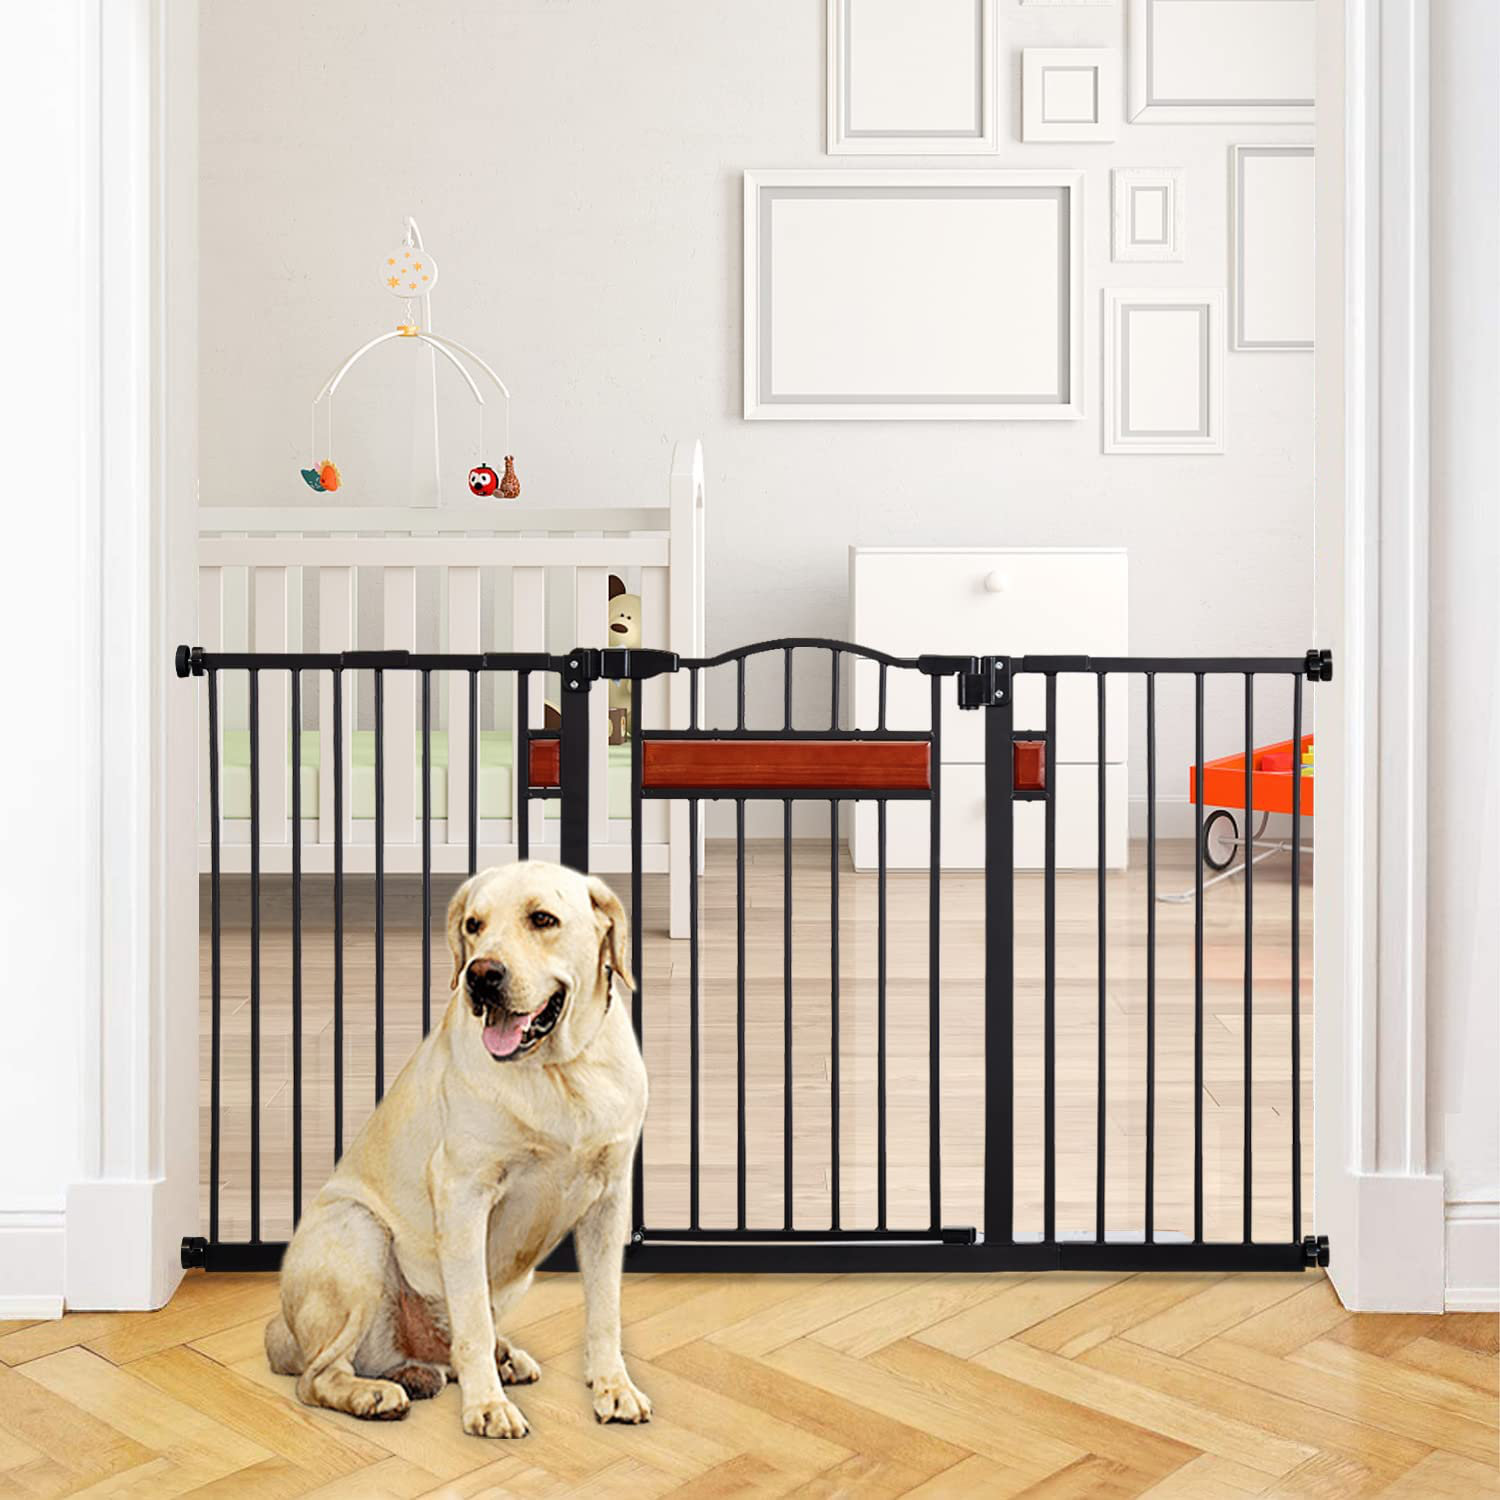 can i use baby gate as dog gate